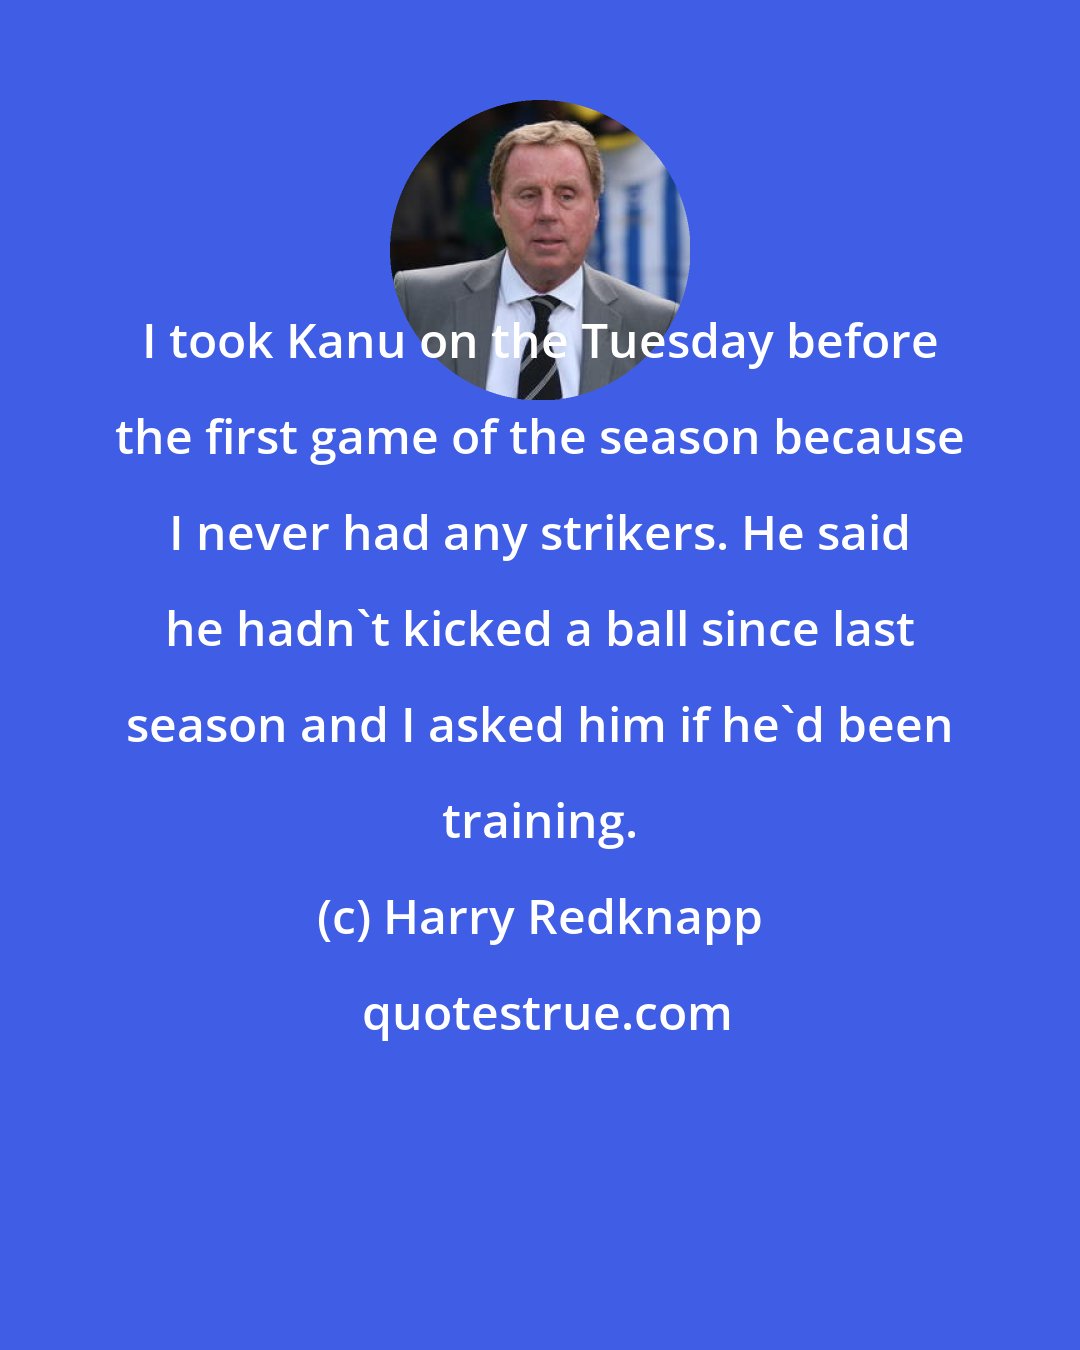 Harry Redknapp: I took Kanu on the Tuesday before the first game of the season because I never had any strikers. He said he hadn't kicked a ball since last season and I asked him if he'd been training.